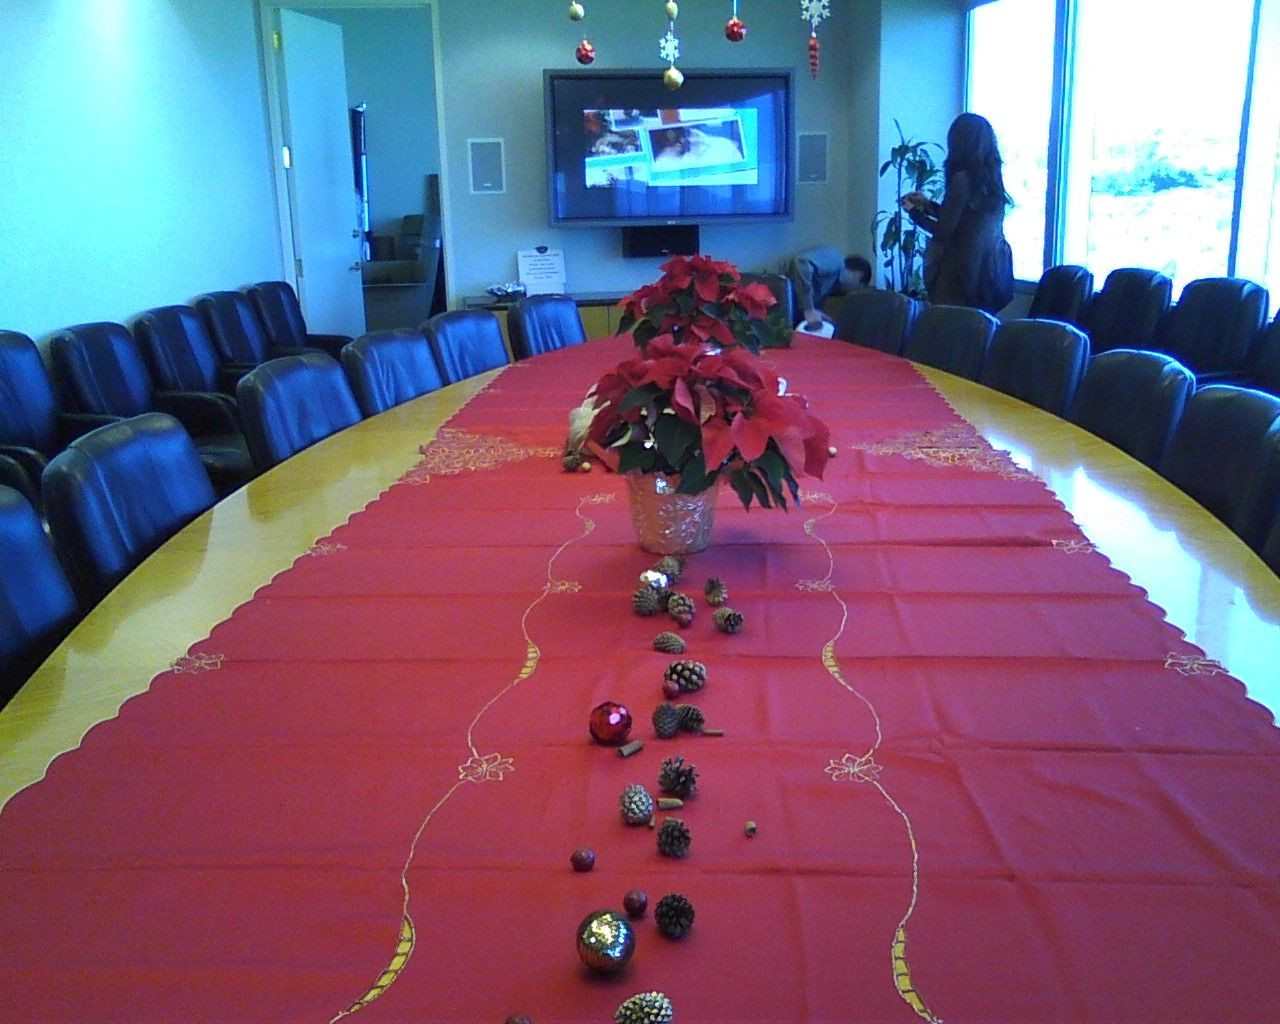 Office Holiday Party Decorating Ideas
 Decorating the Boardroom for our office Holiday Party